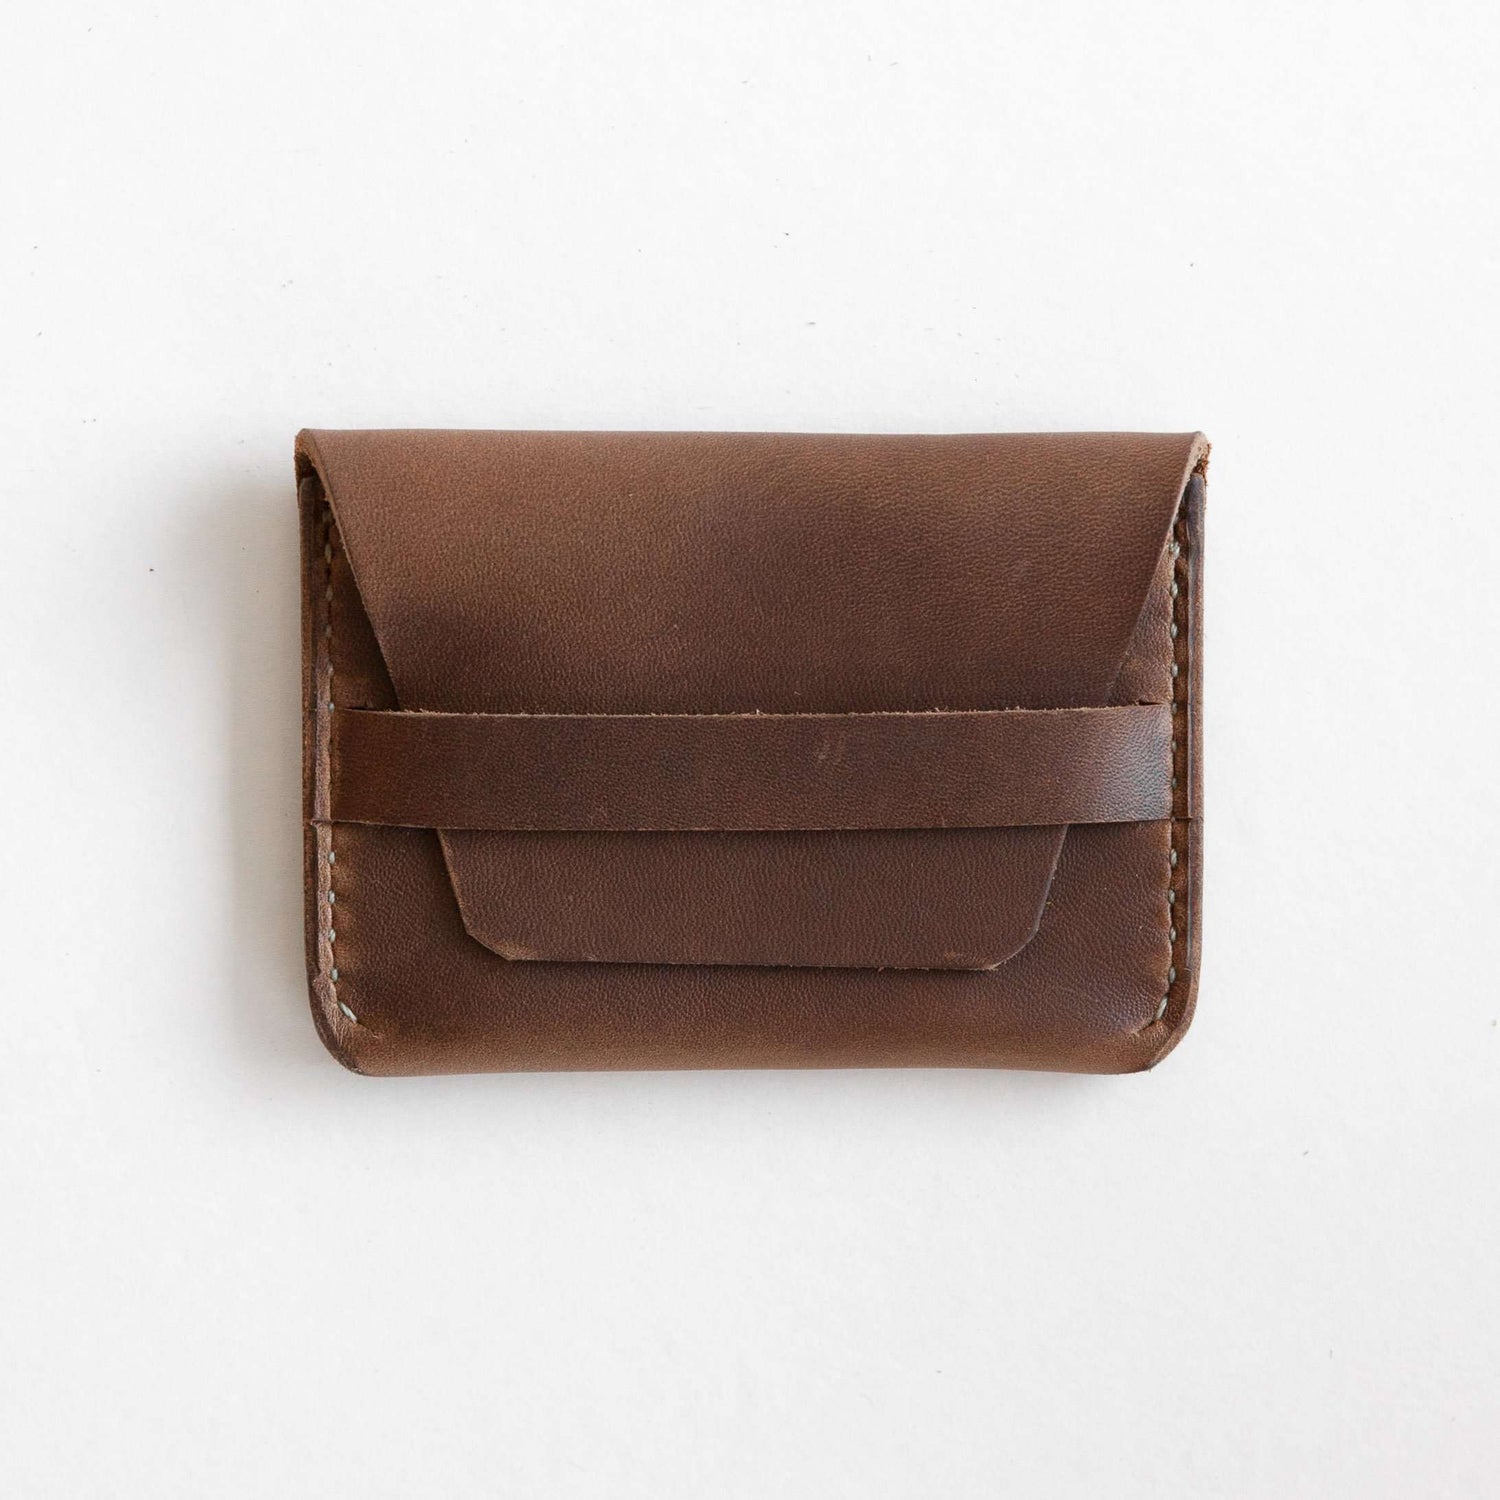 Natural Chromexcel Flap Wallet- mens leather wallet - handmade leather wallets at KMM &amp; Co.